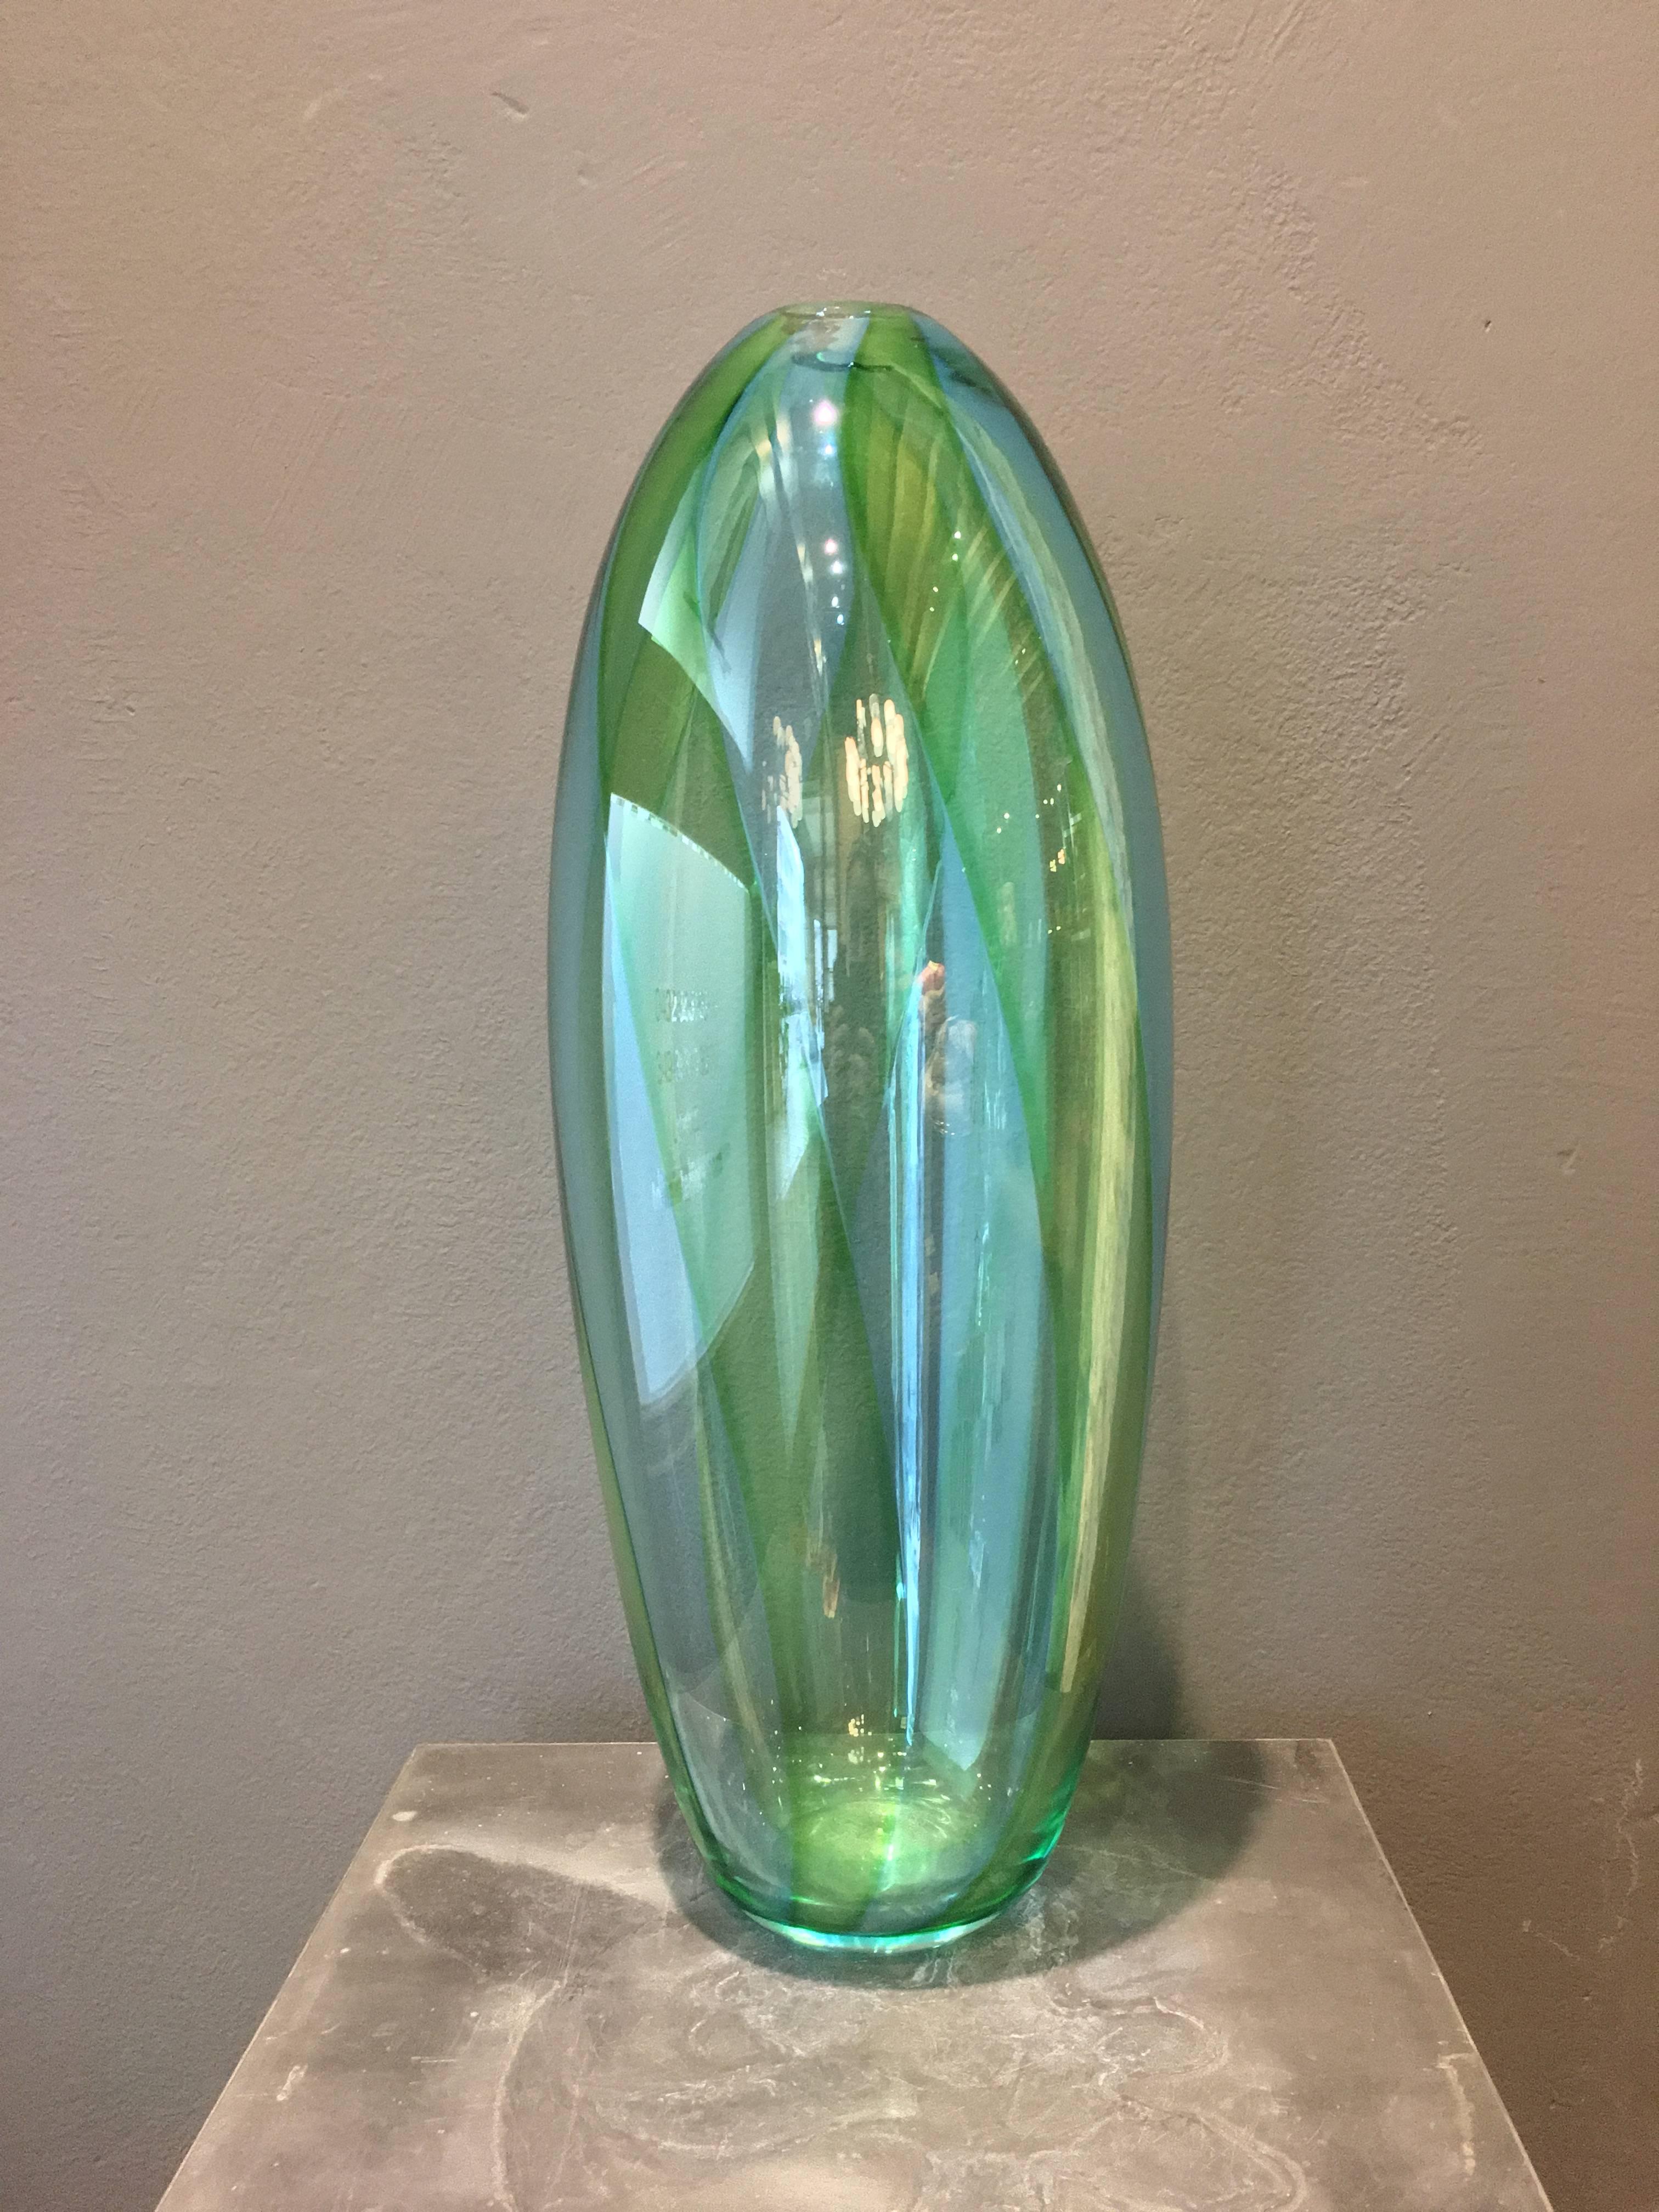 Amazing vintage vase
Blown glass
Signed Formia (on the bottom)
Murano - Venice
Made in Italy
Light green and light blue stripes
1970 period
Measures: D 20, H 52 cm.